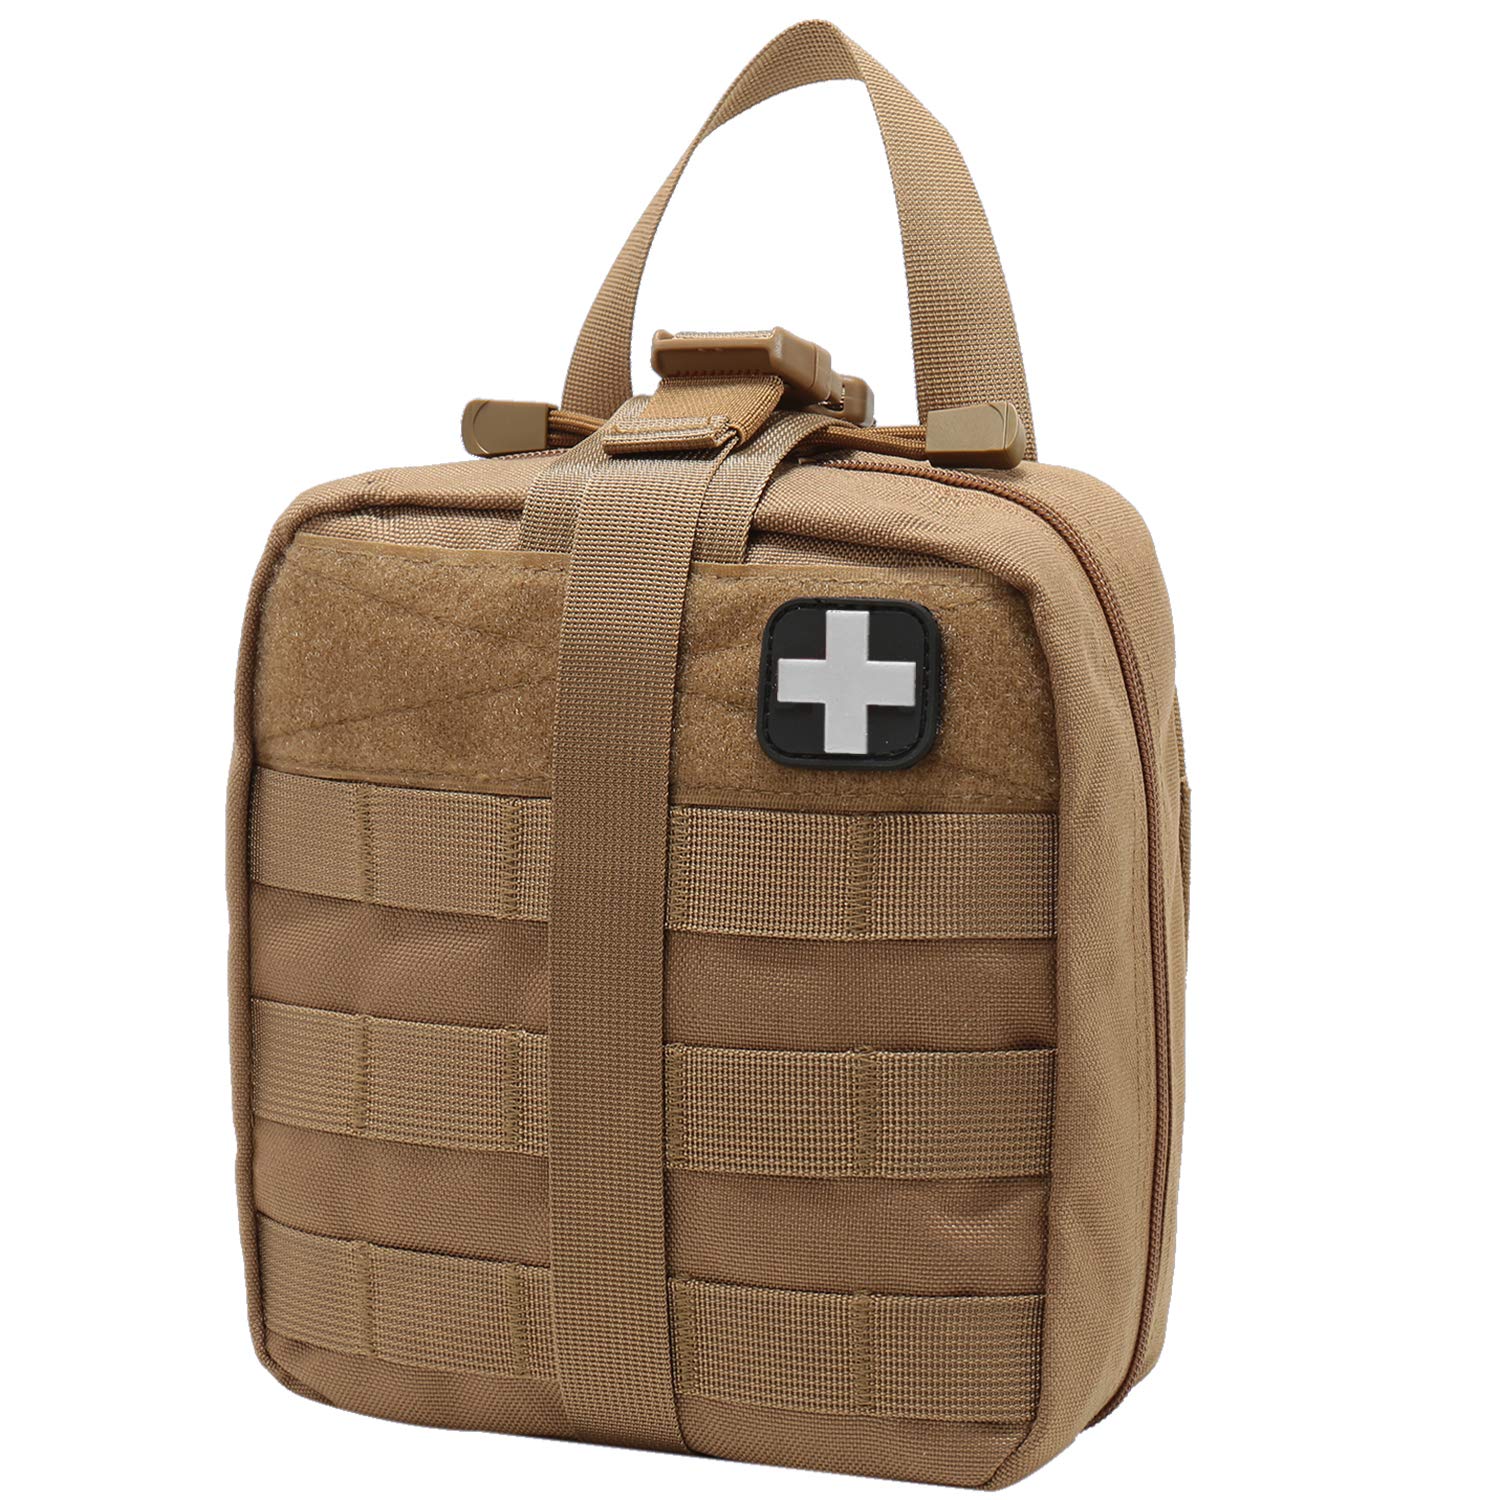 Rip-Away EMT Pouch Molle Pouch Ifak Pouch Medical First Aid Kit Utility  Pouch 1000D Nylon Carlebben (with Medical Supplies Tan)